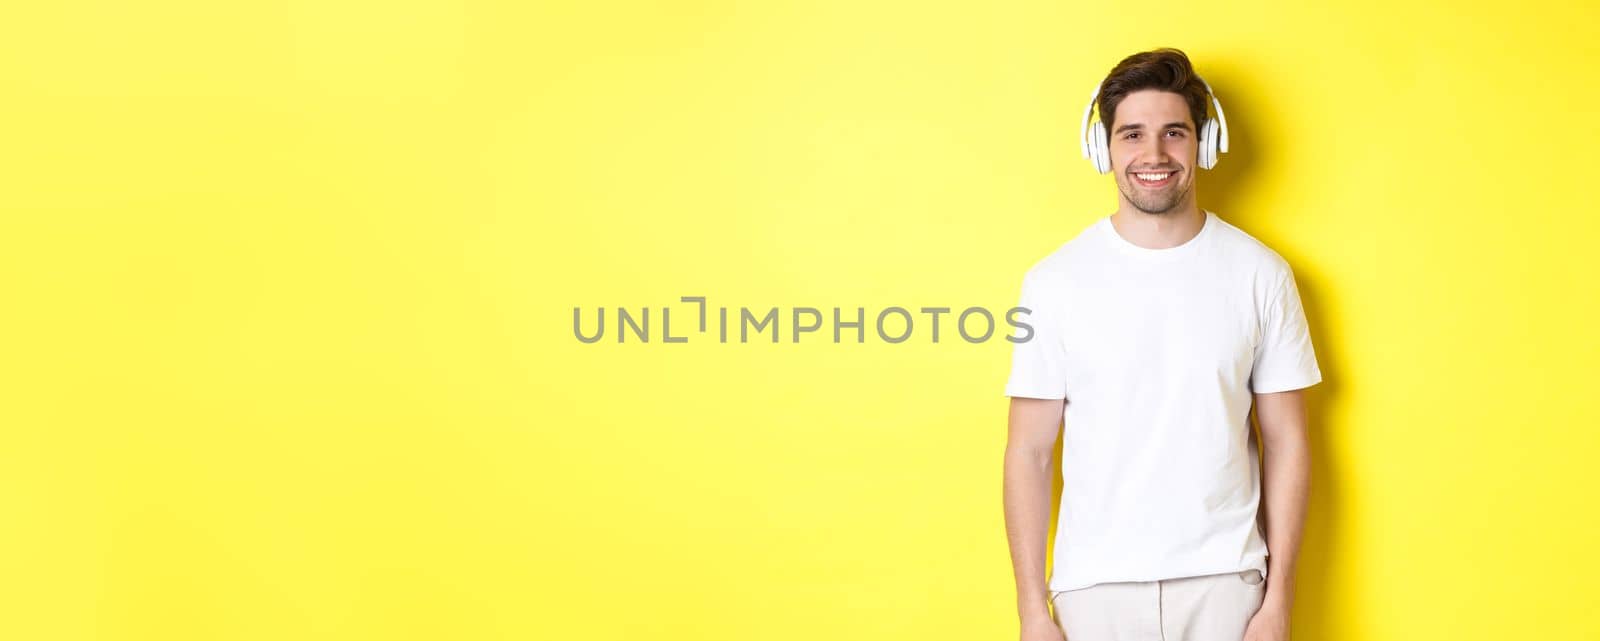 Young handsome man listening music in headphones, wearing earphones and smiling, standing over yellow background.